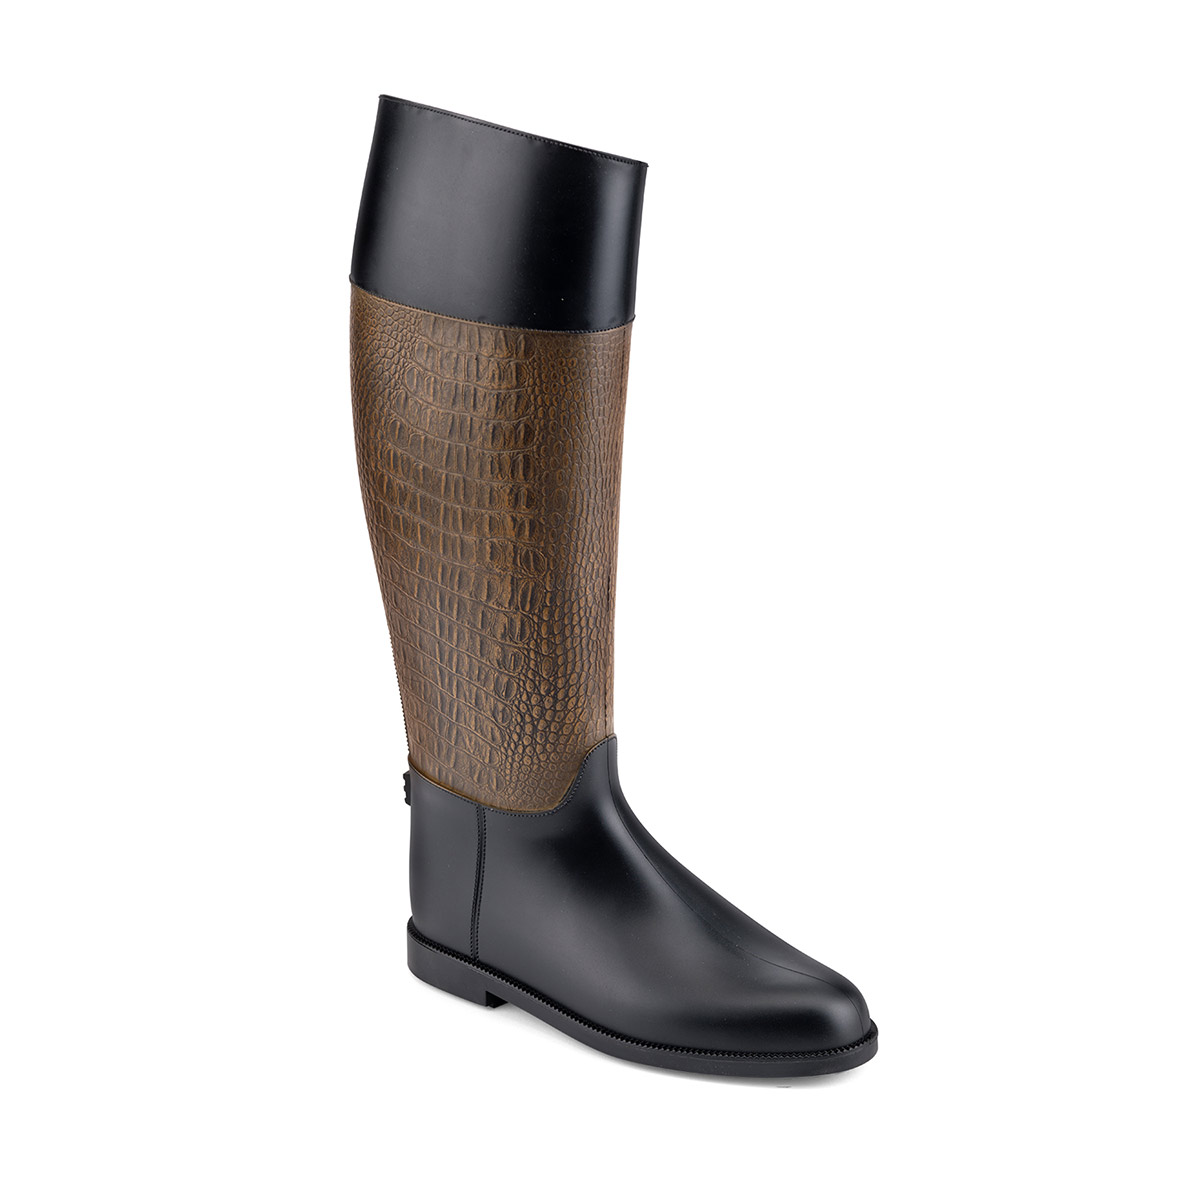 Pvc Riding Boot with a crocodile printing